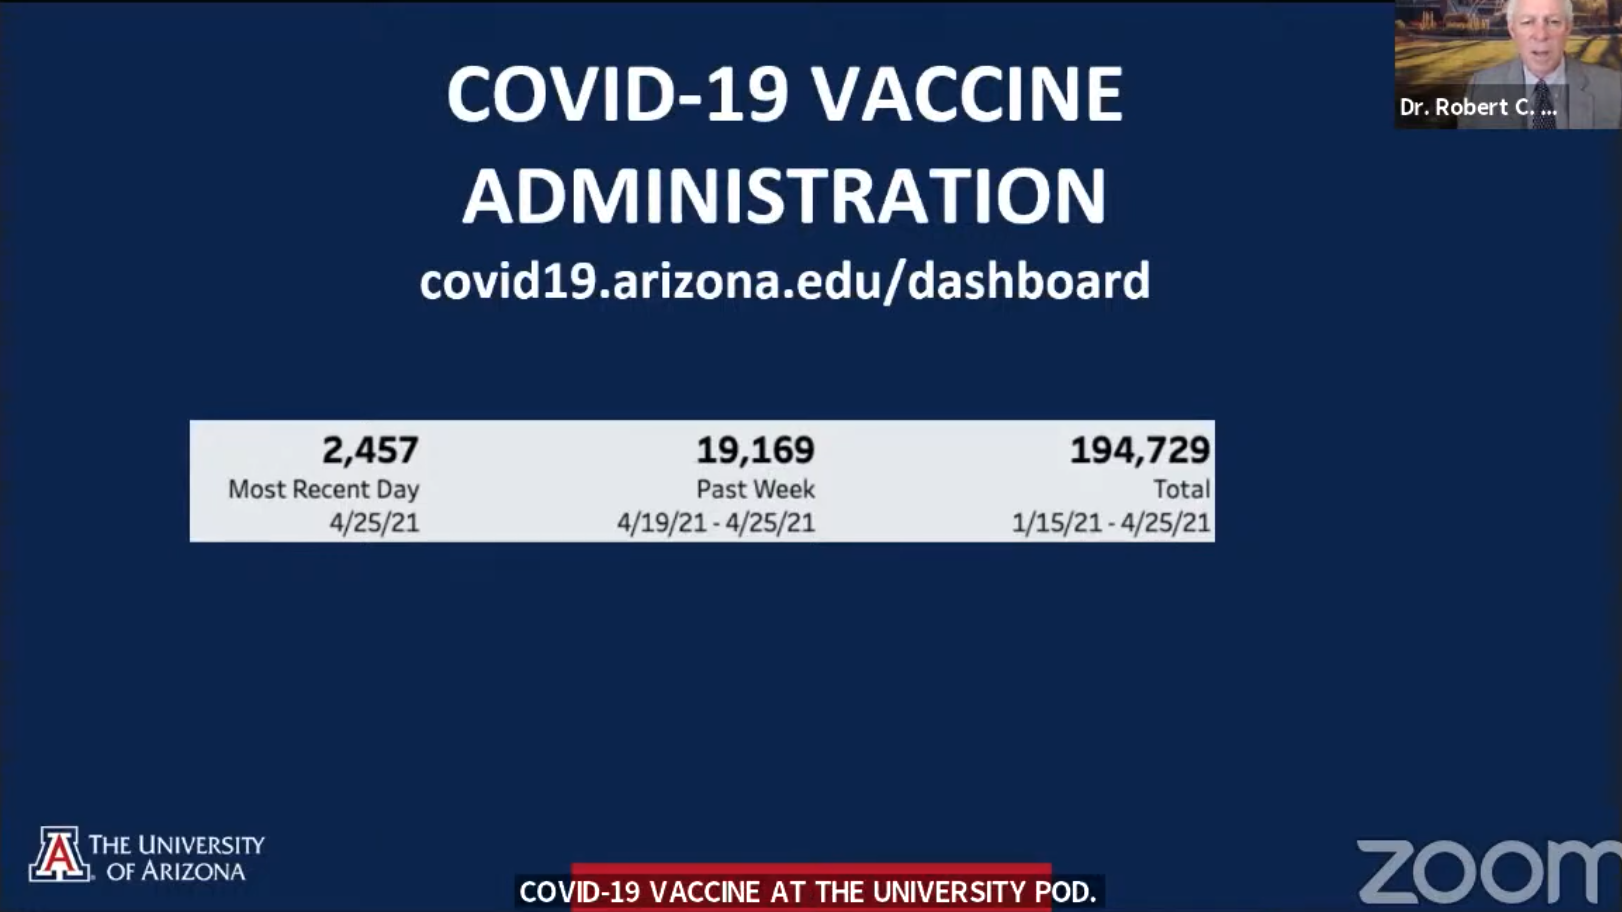 Screenshot of recent COVID-19 vaccine administration data, indicating that over 194,000 people have received the vaccine in total so far.